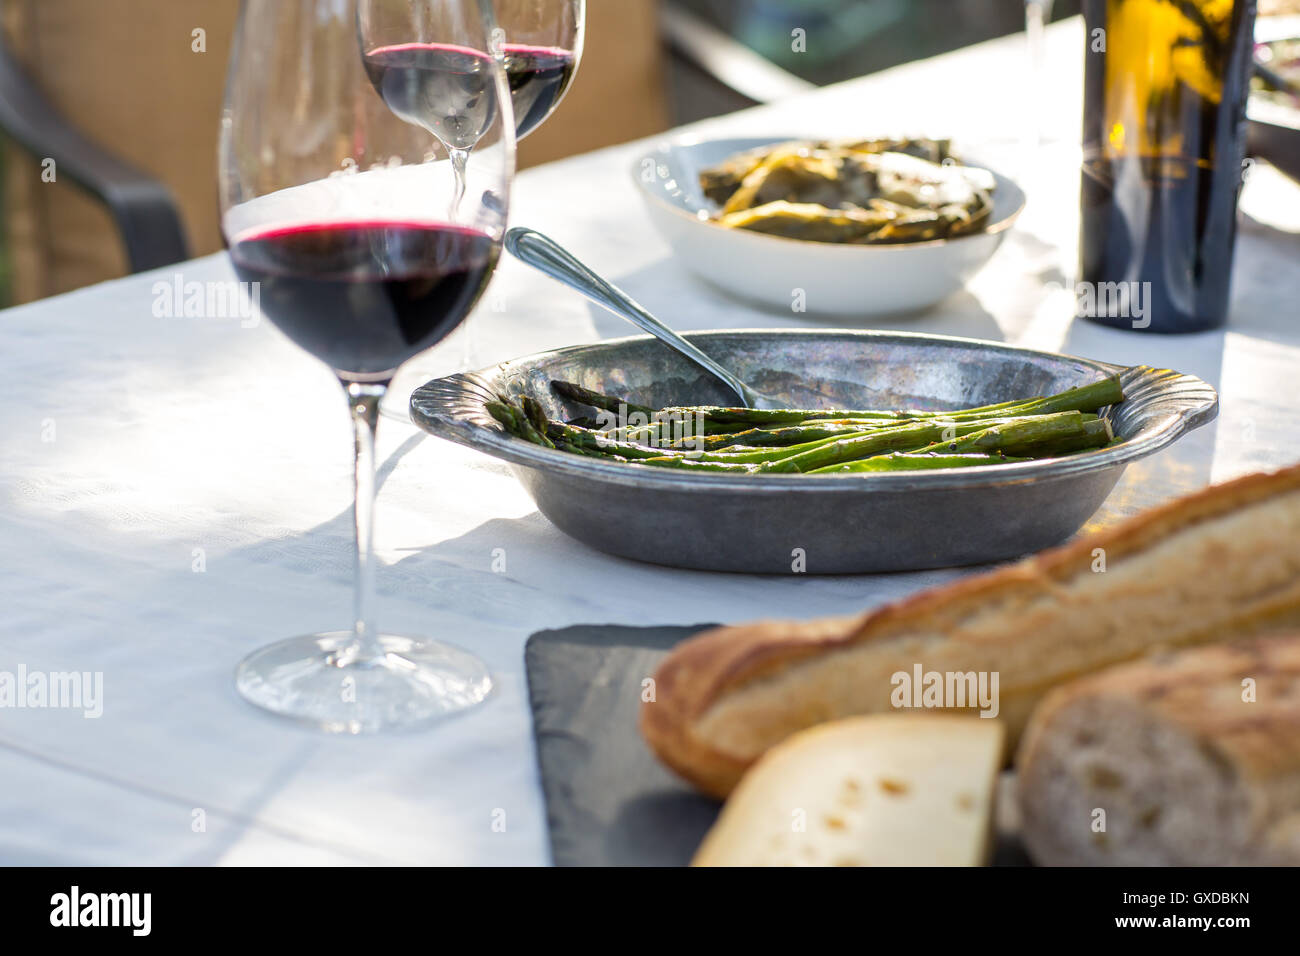 Party garden table with red wine, cheese board and green beans Stock Photo